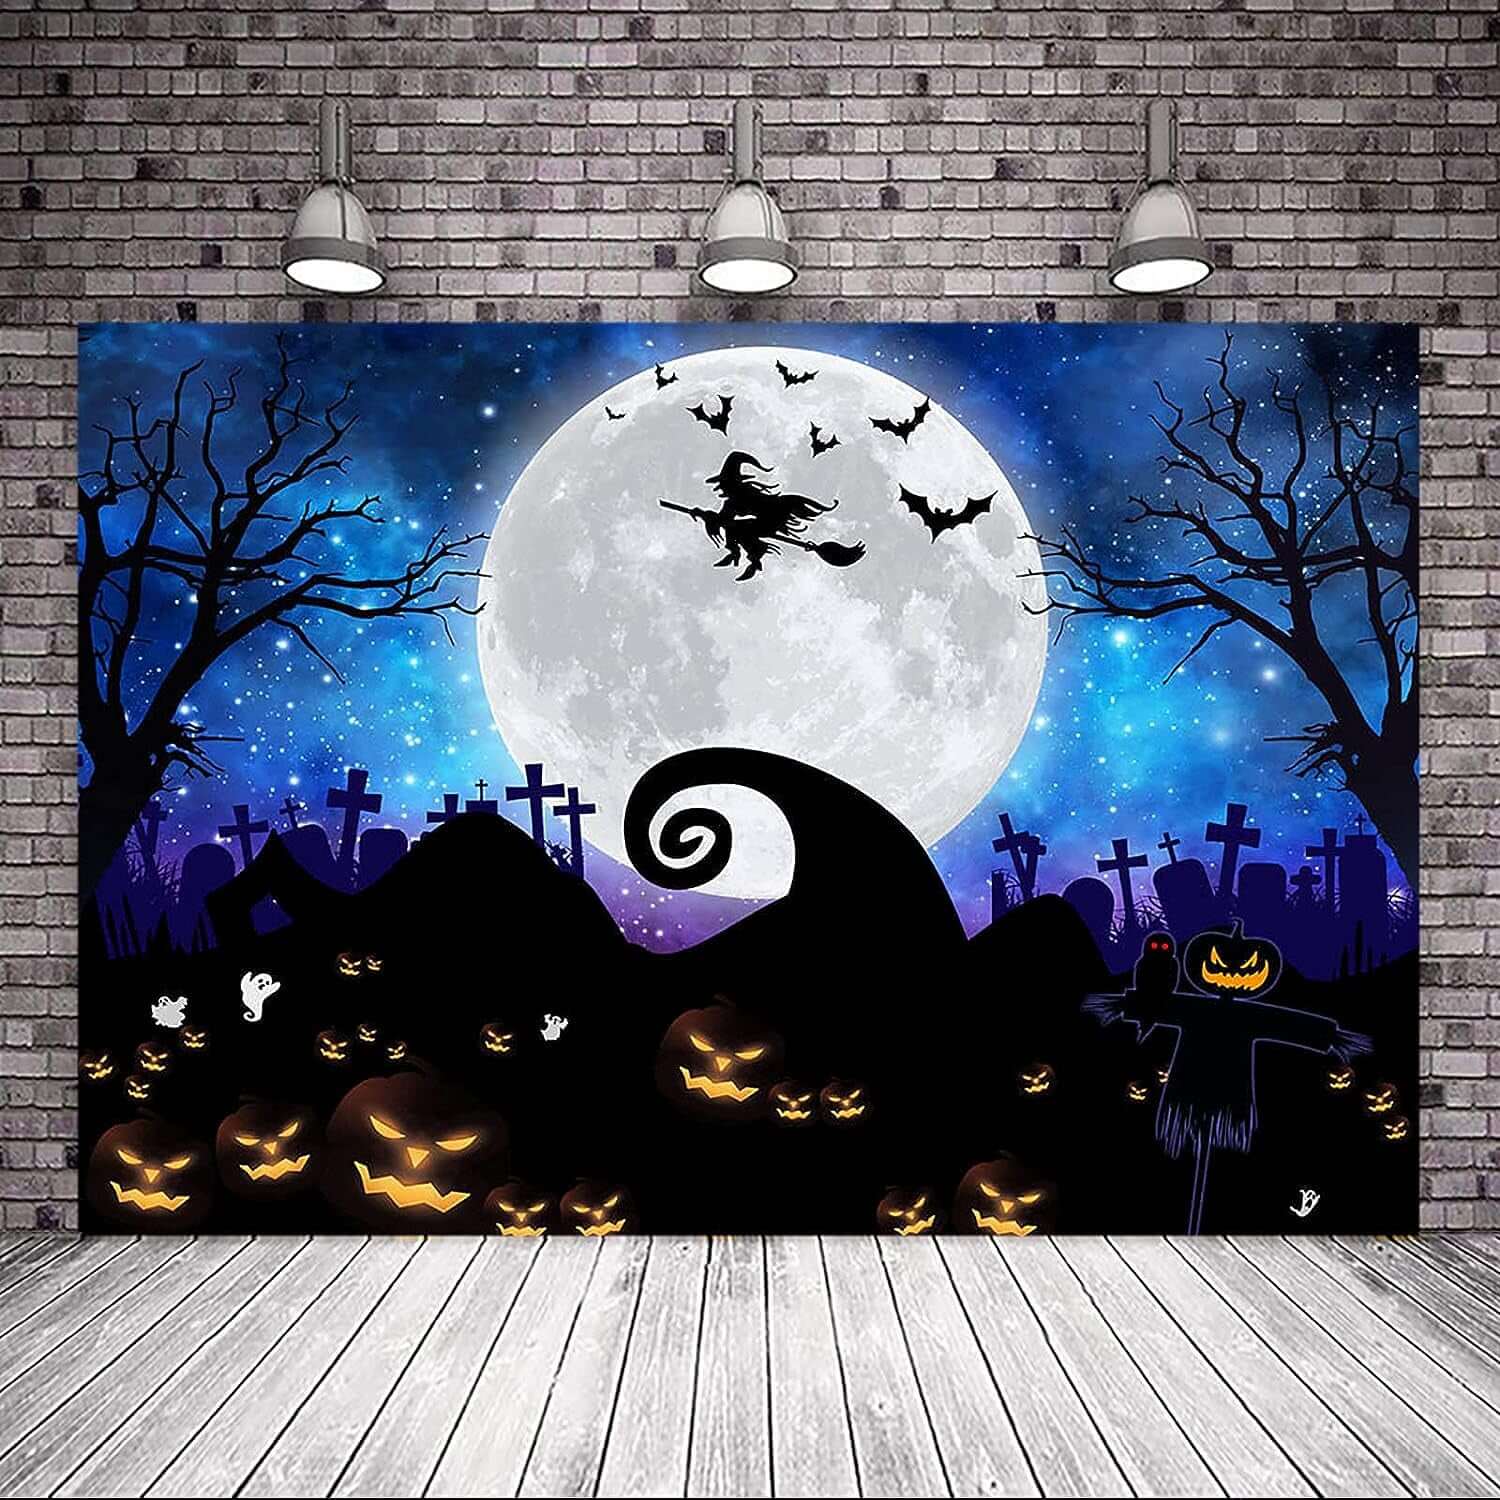 Capture Spooky Moments with our Halloween Photography Backdrop! Featuring a Hauntingly Beautiful Scene with a Glowing Moon, Scary Pumpkins, Bats, and More. Perfect for Halloween Parties, Birthday Celebrations, Baby Showers, and More. Size: 8x6 Feet